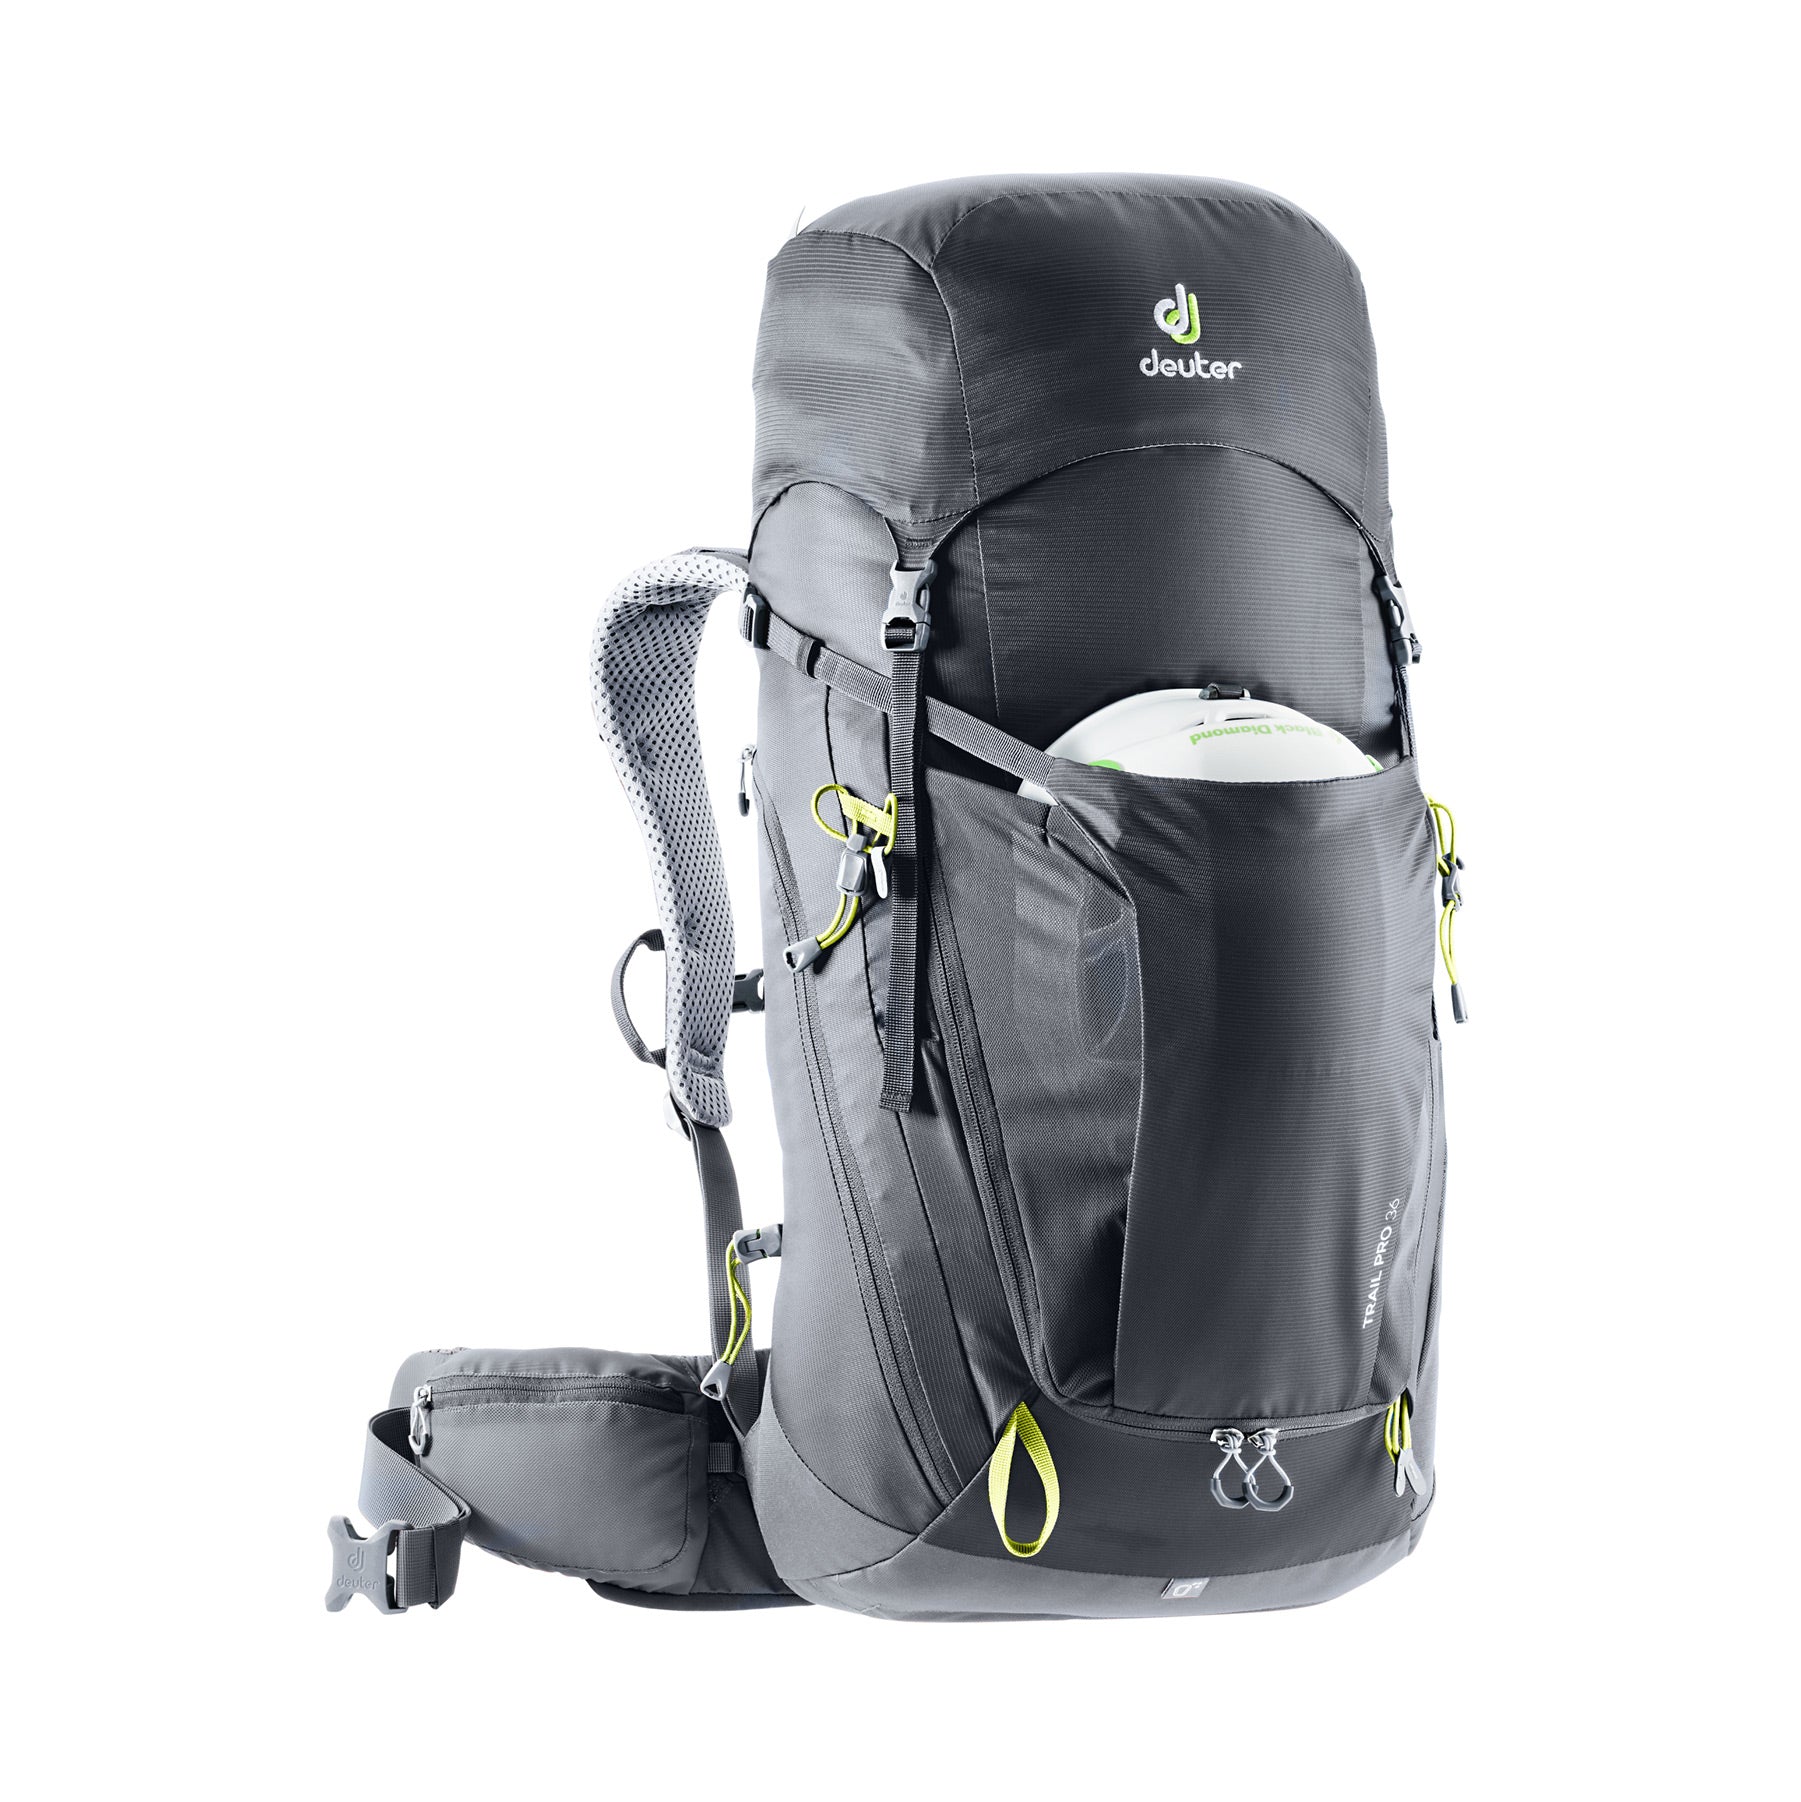 deuter trail pro 36 liter backpack front view with helmet in color black with lime green details